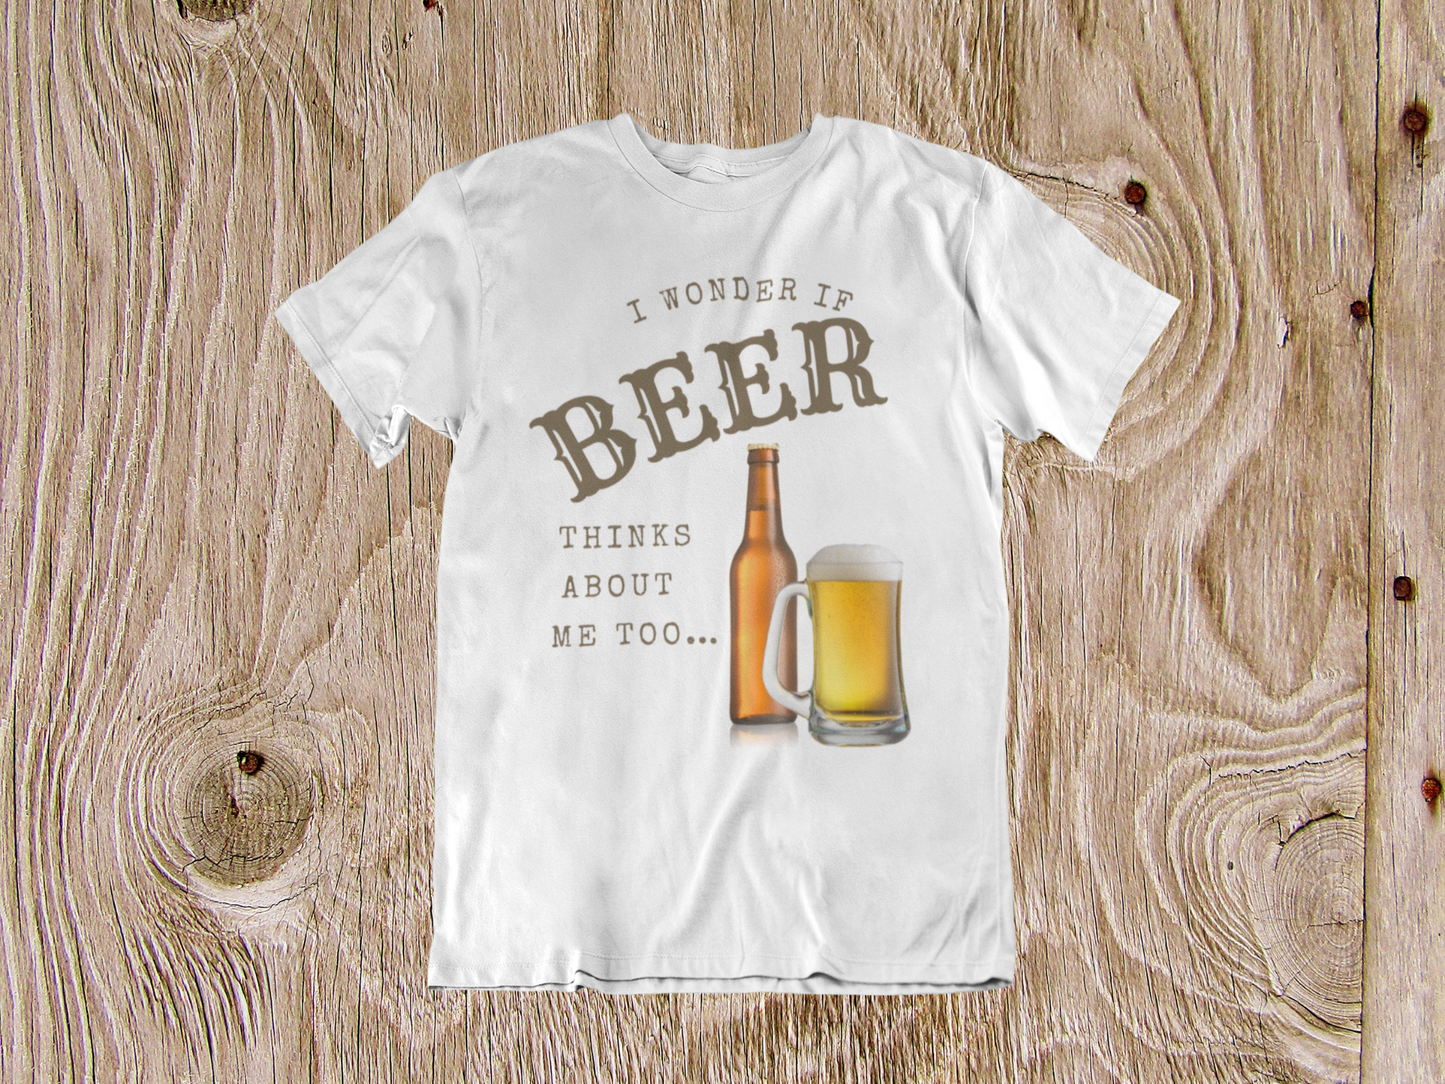 I Wonder If Beer Thinks About Me Too T-Shirt -White